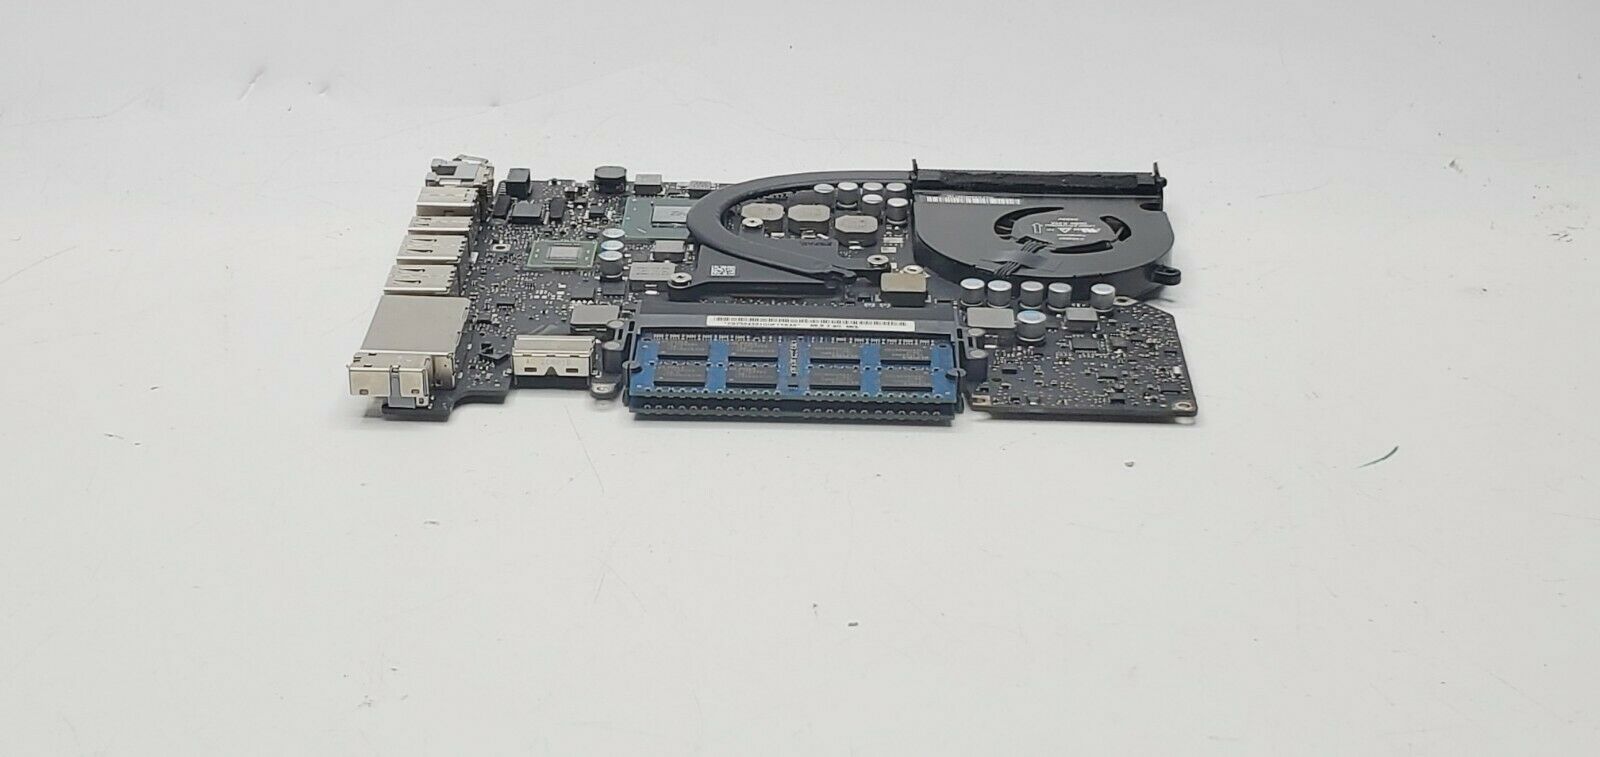 Motherboard for MacBook Pro A1278 13-inch, 2012, Core i5 2.5GHz,